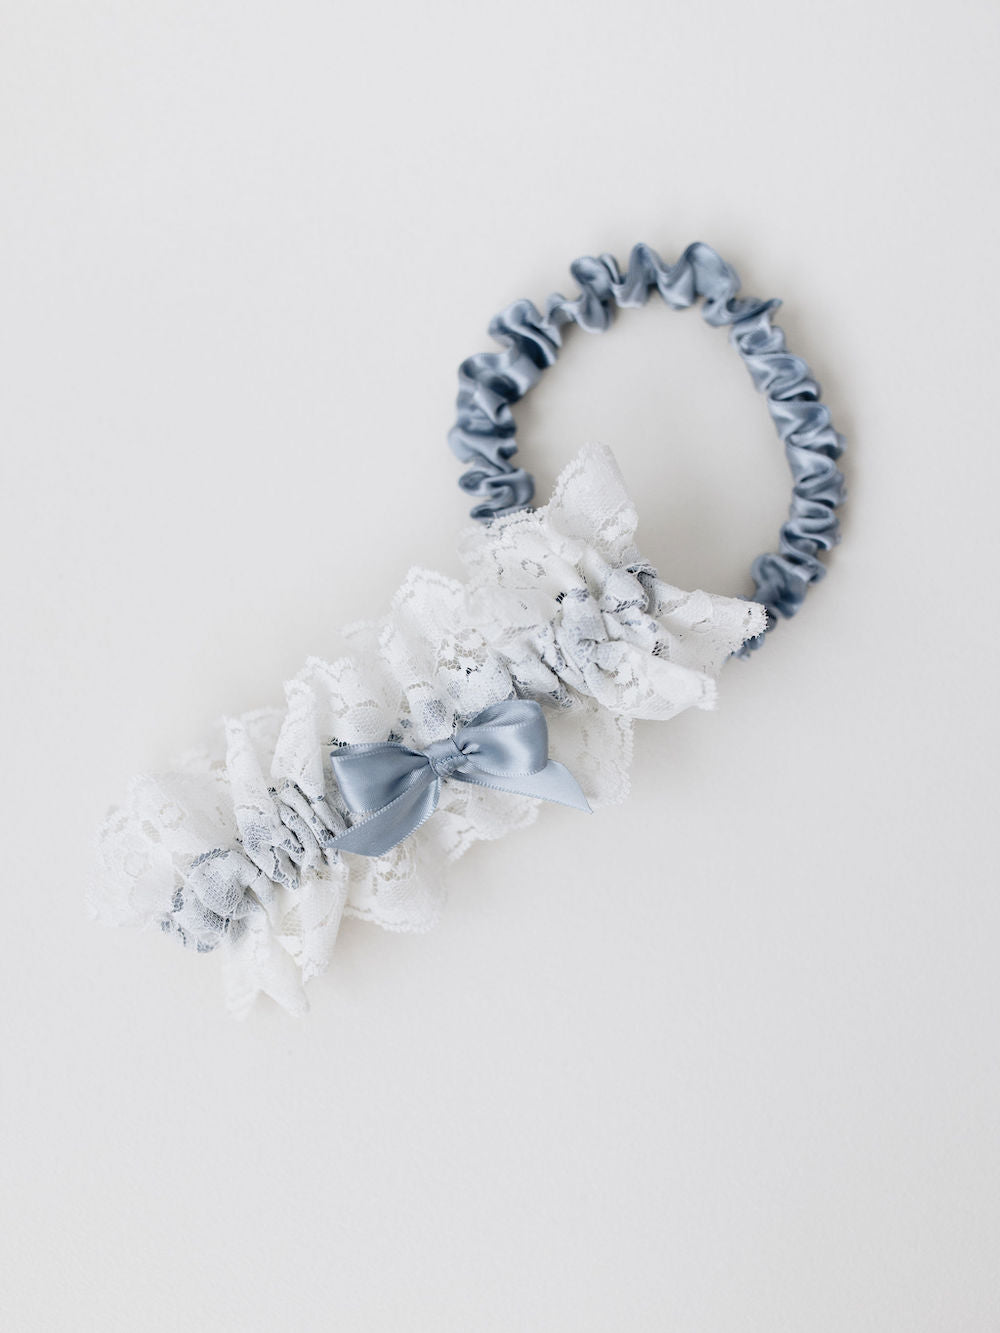 garter set with ivory lace main and blue satin tossing garters handmade by The Garter Girl